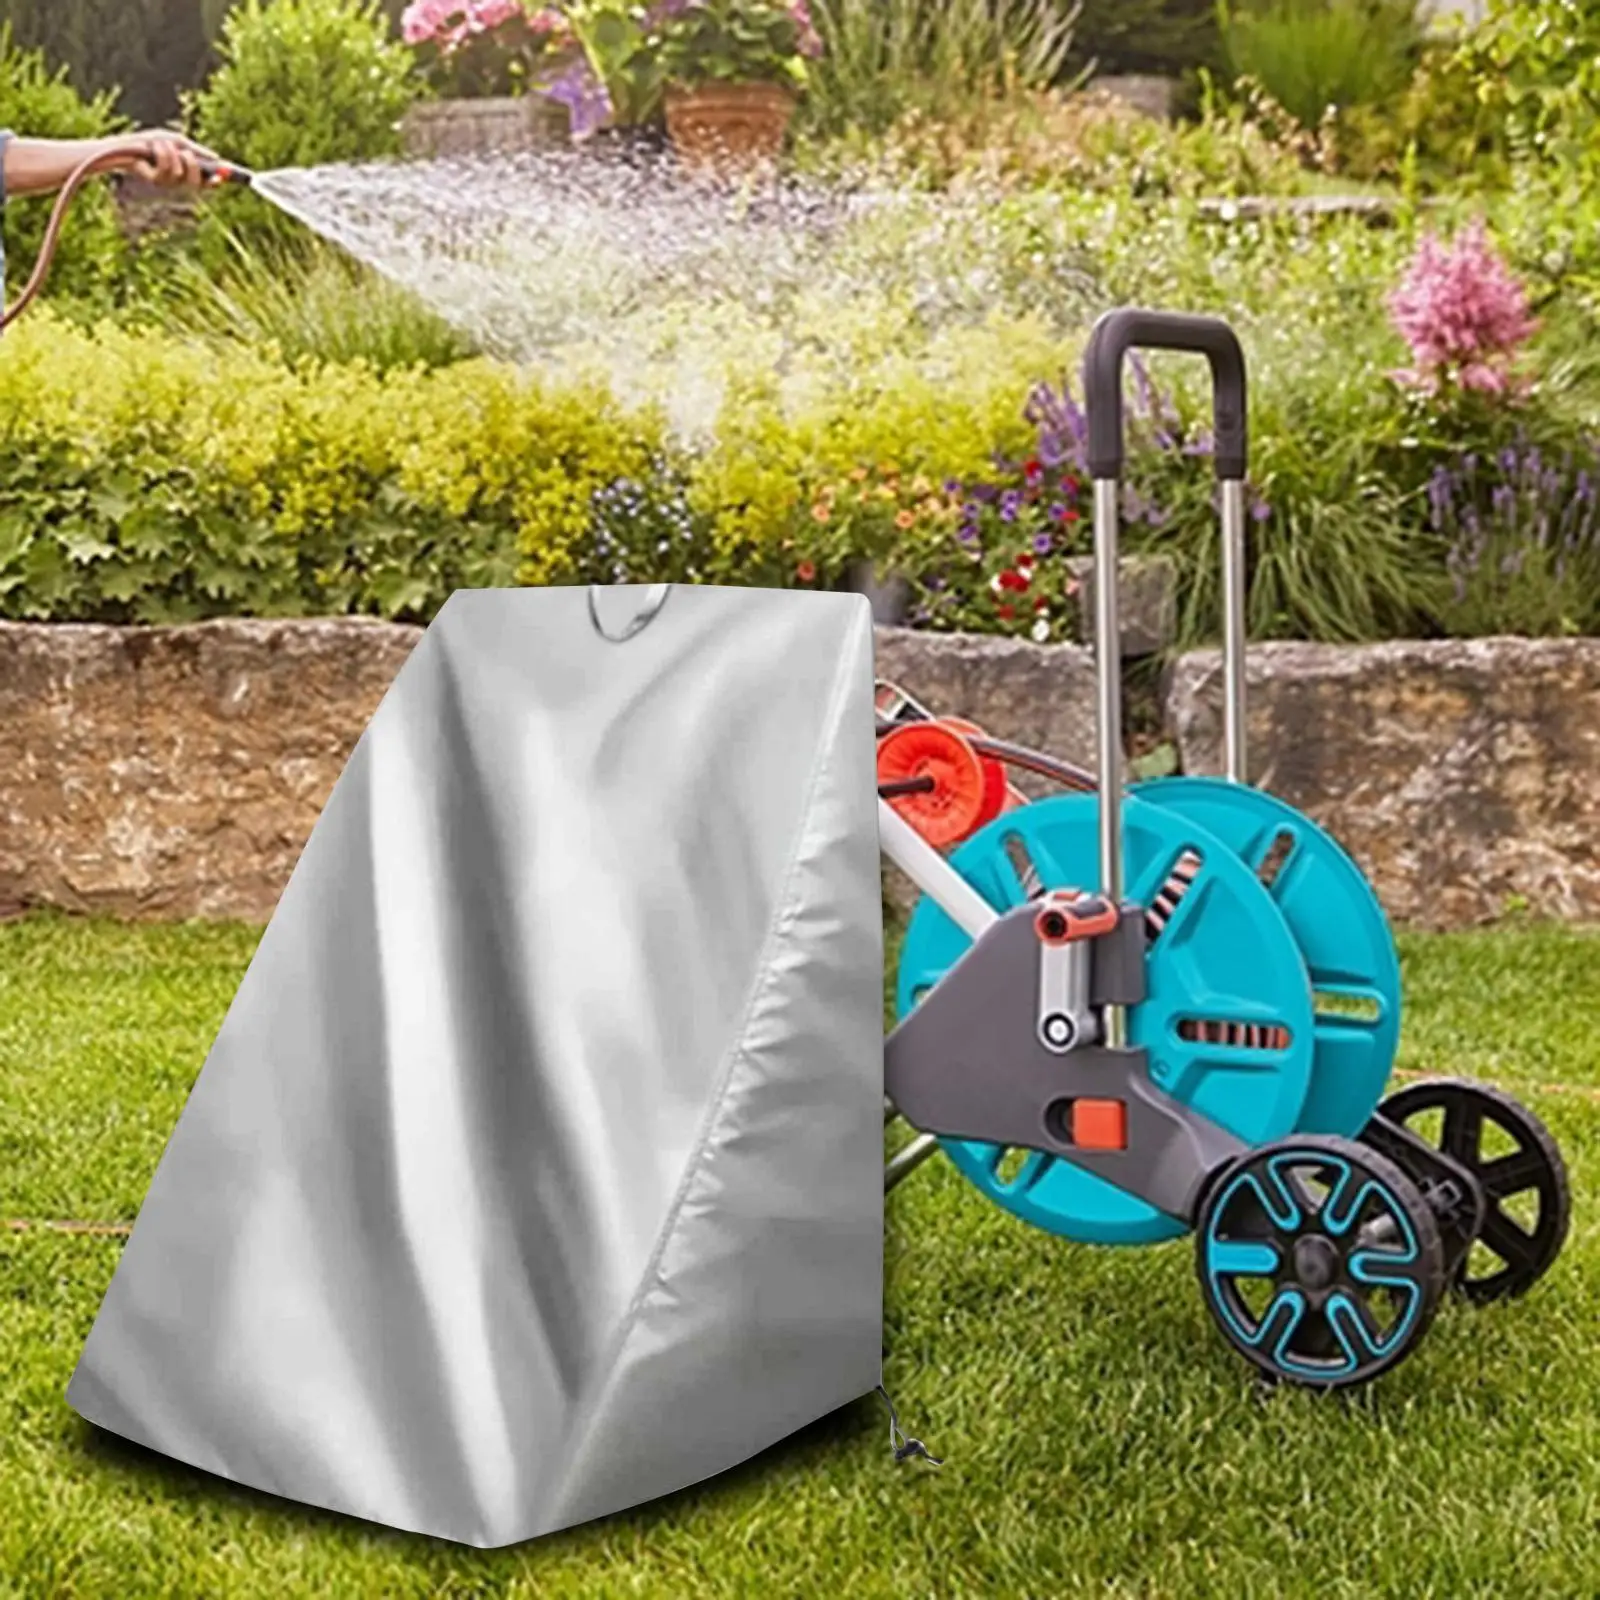 Hose Reel Cover Hose Cart Covers Accs Garden Tool Protection Outdoor Heavy Duty